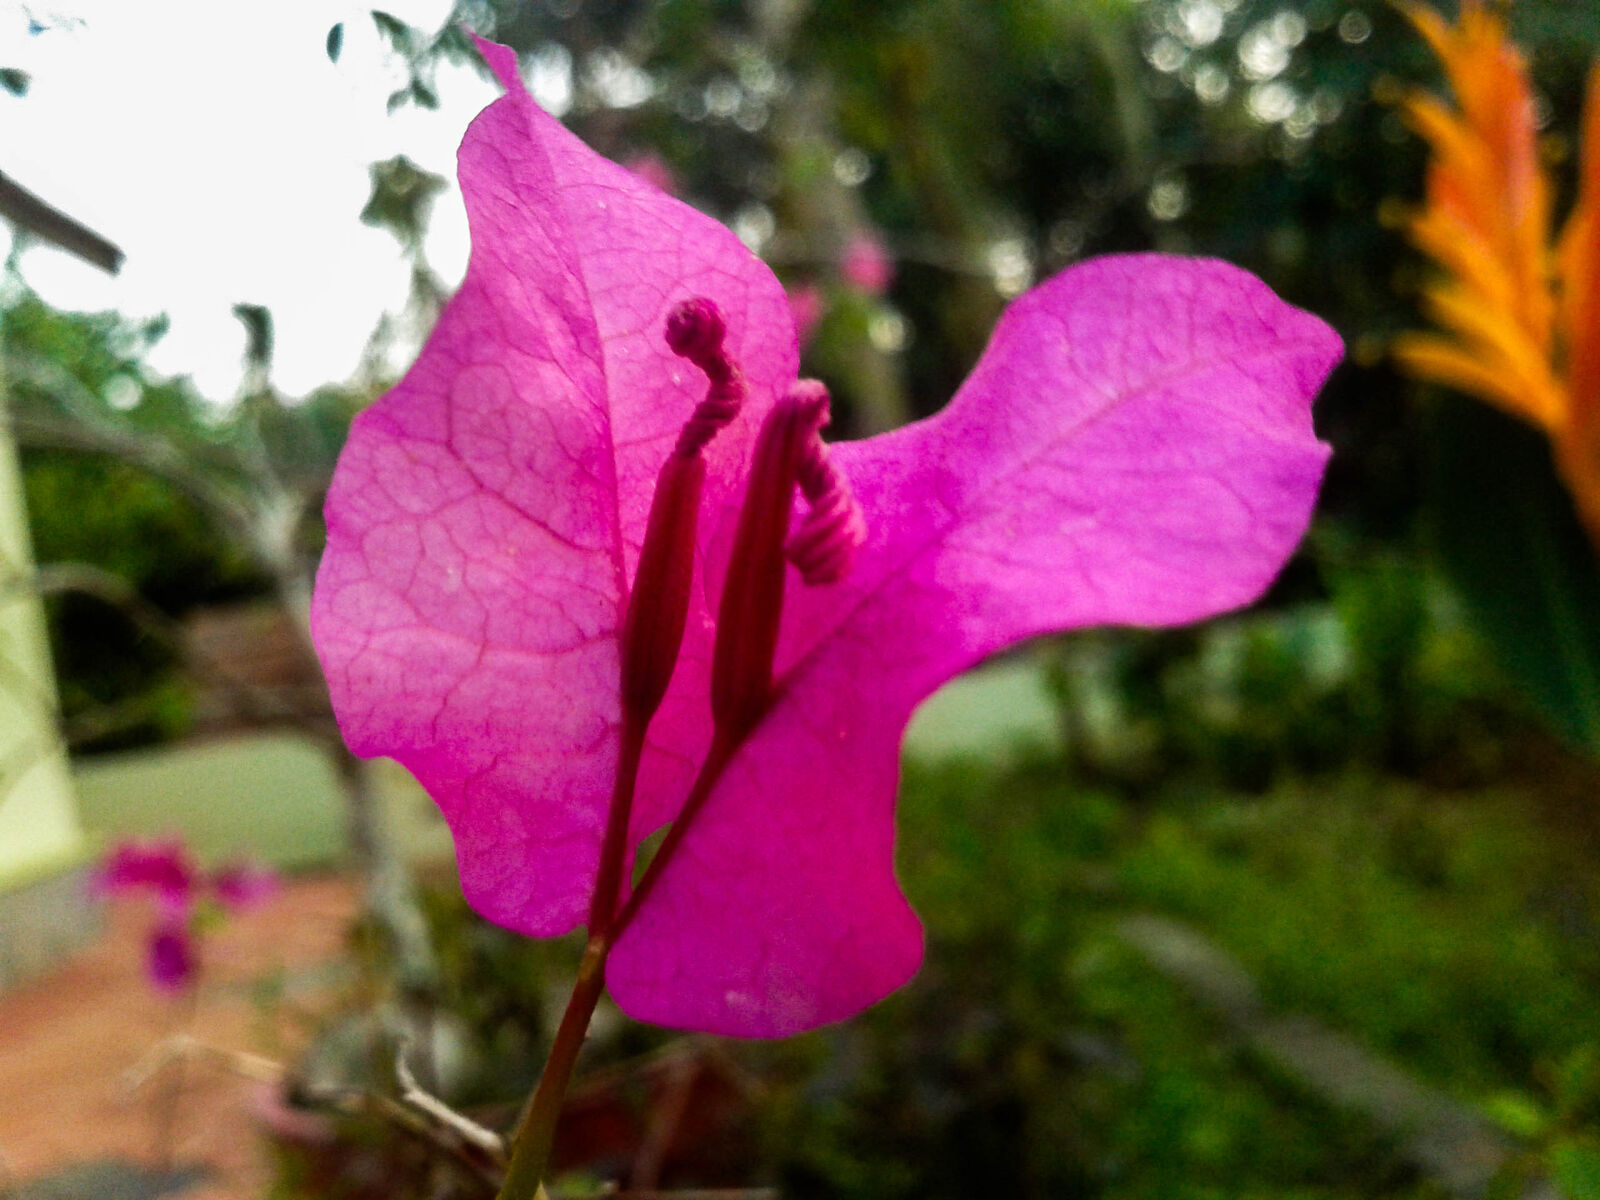 Samsung Galaxy Fit sample photo. Flower, flowers, kerala, nature photography